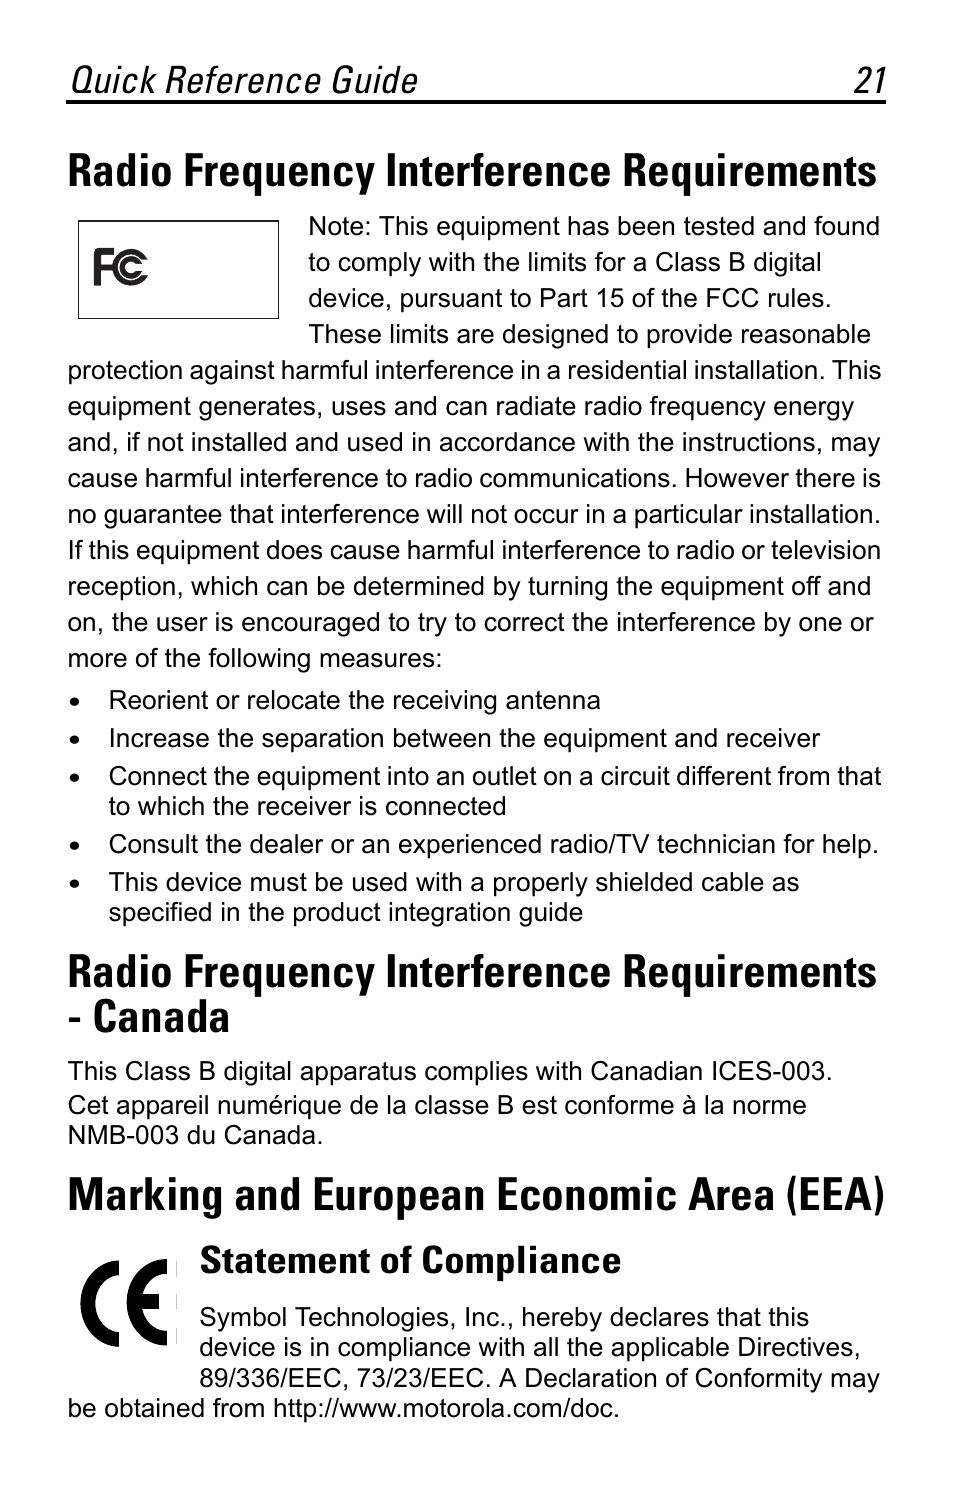 Radio frequency interference requirements, Radio frequency interference requirements - canada, Marking and european economic area (eea) | Statement of compliance, Quick reference guide 21 | Motorola SYMBOL MS120XWA User Manual | Page 21 / 24